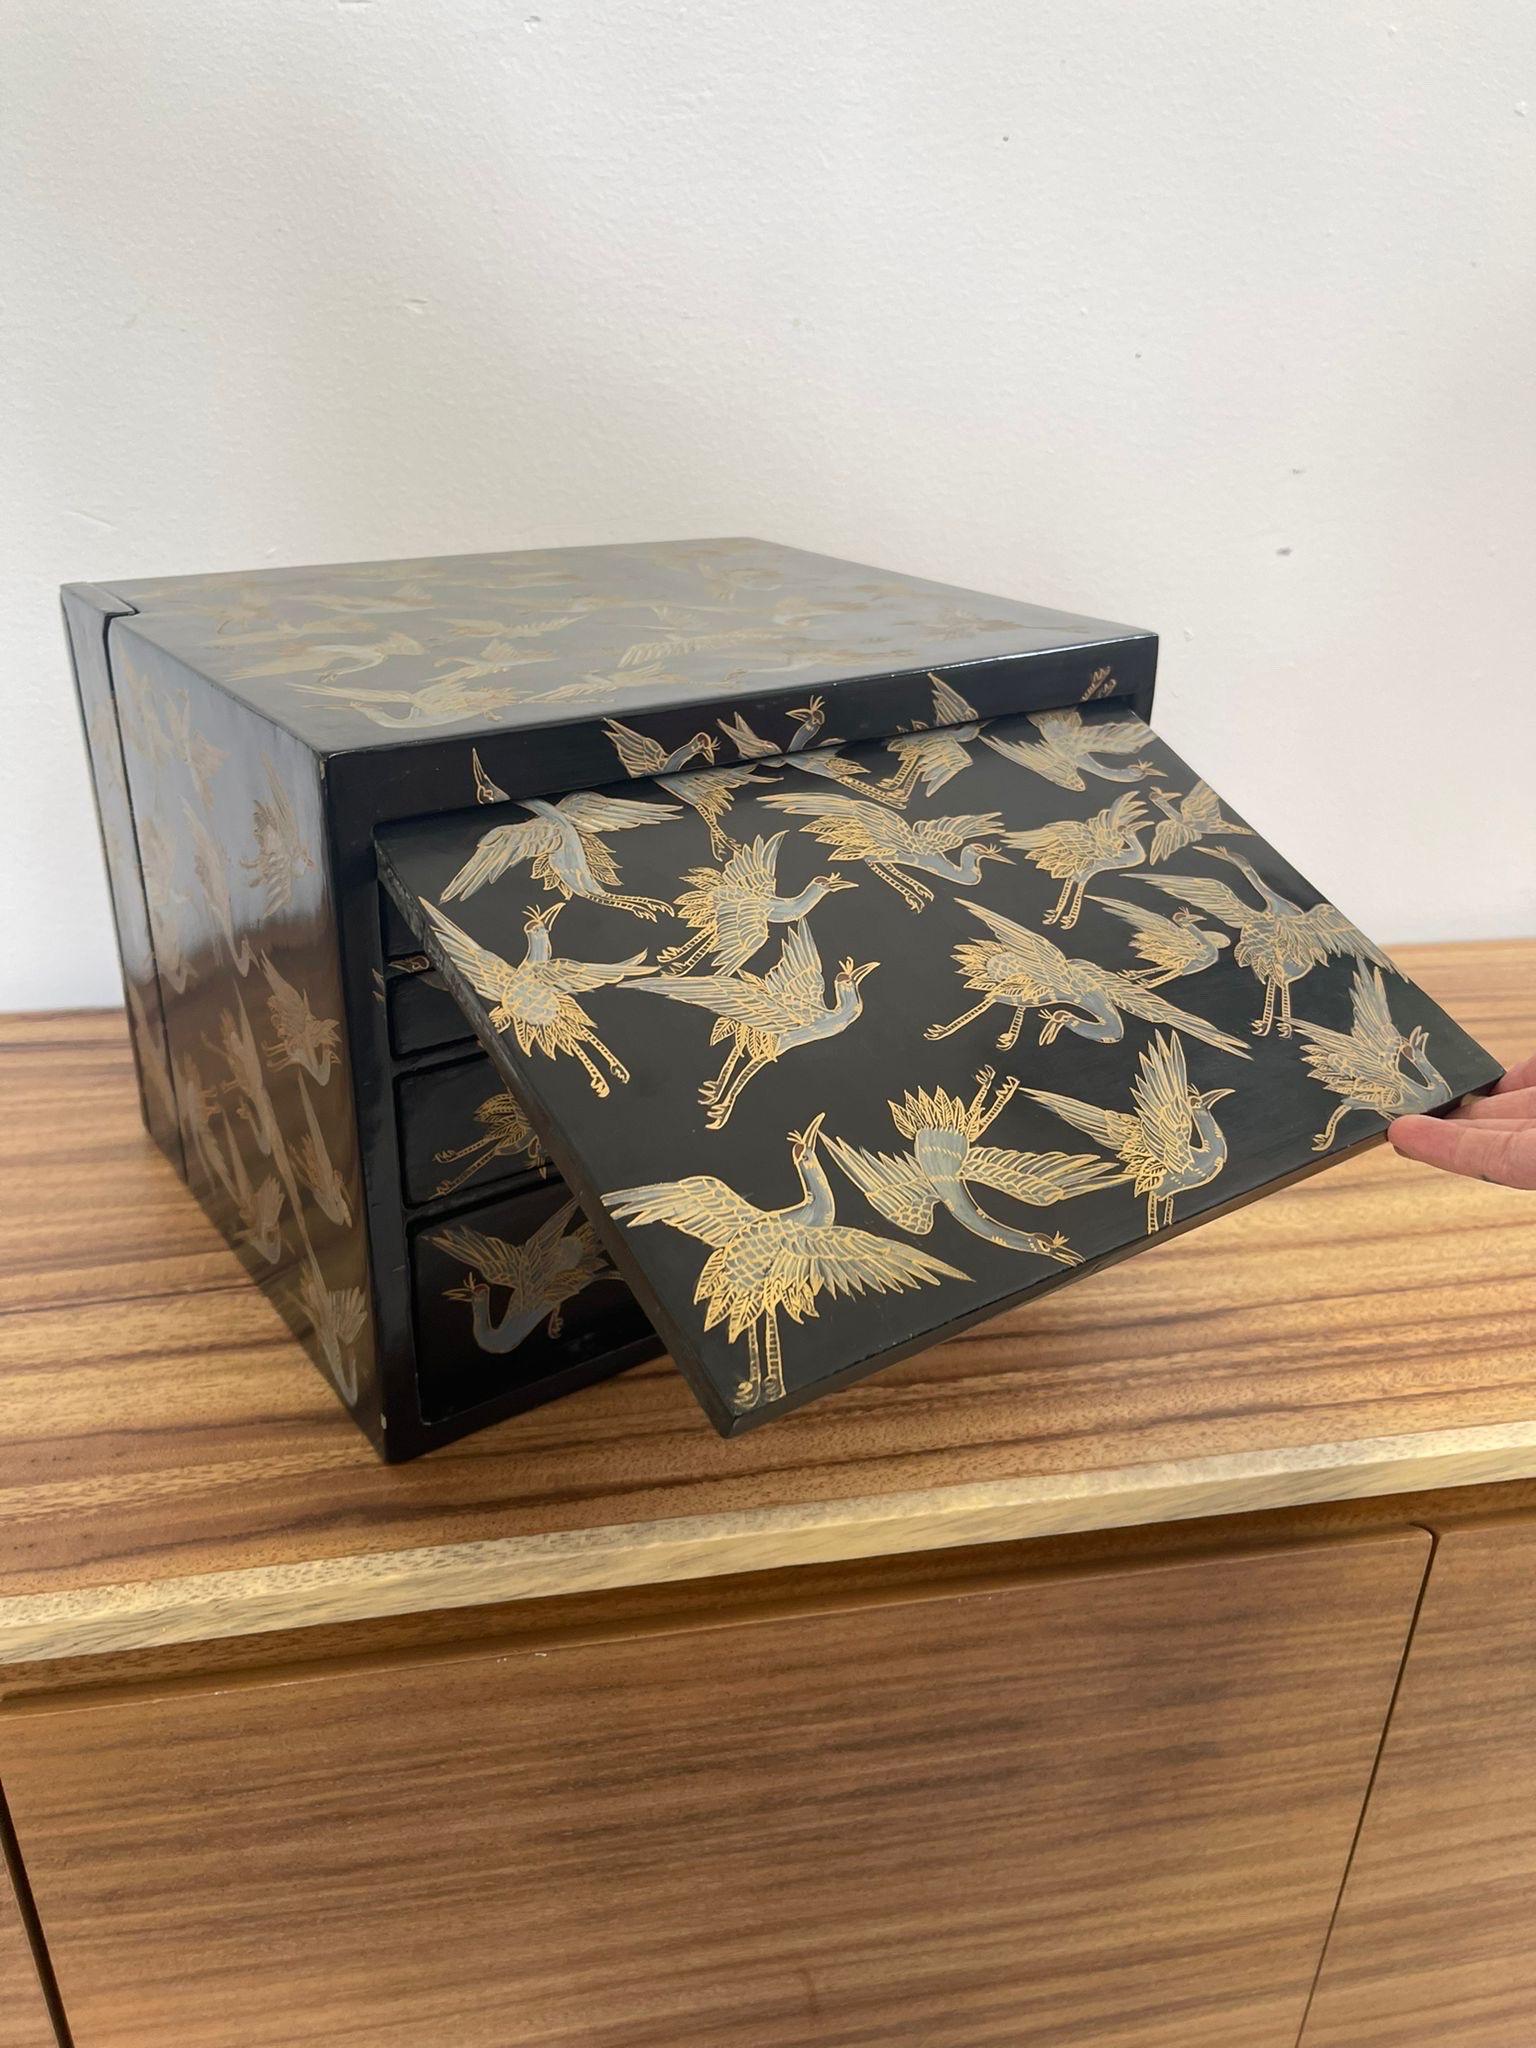 Wood Japanese Storage Box With Hidden Compartments and Crane Motif.